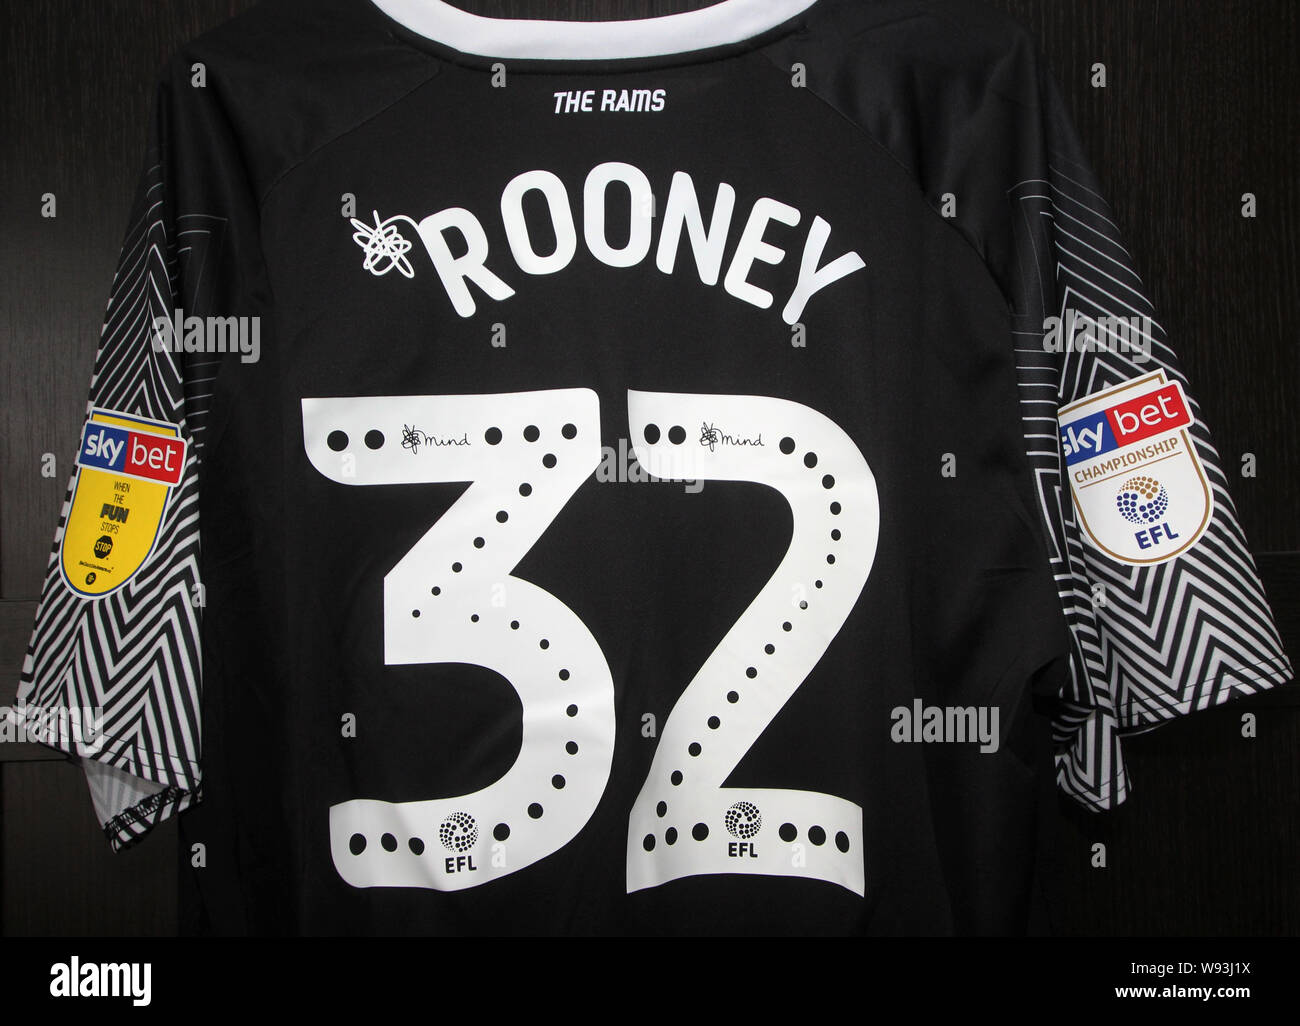 Derby County FC Official Replica kit showing the Wayne Rooney Number 32  Shirt with Sponsors 32 Red. Also Skybet Championship logos Stock Photo -  Alamy